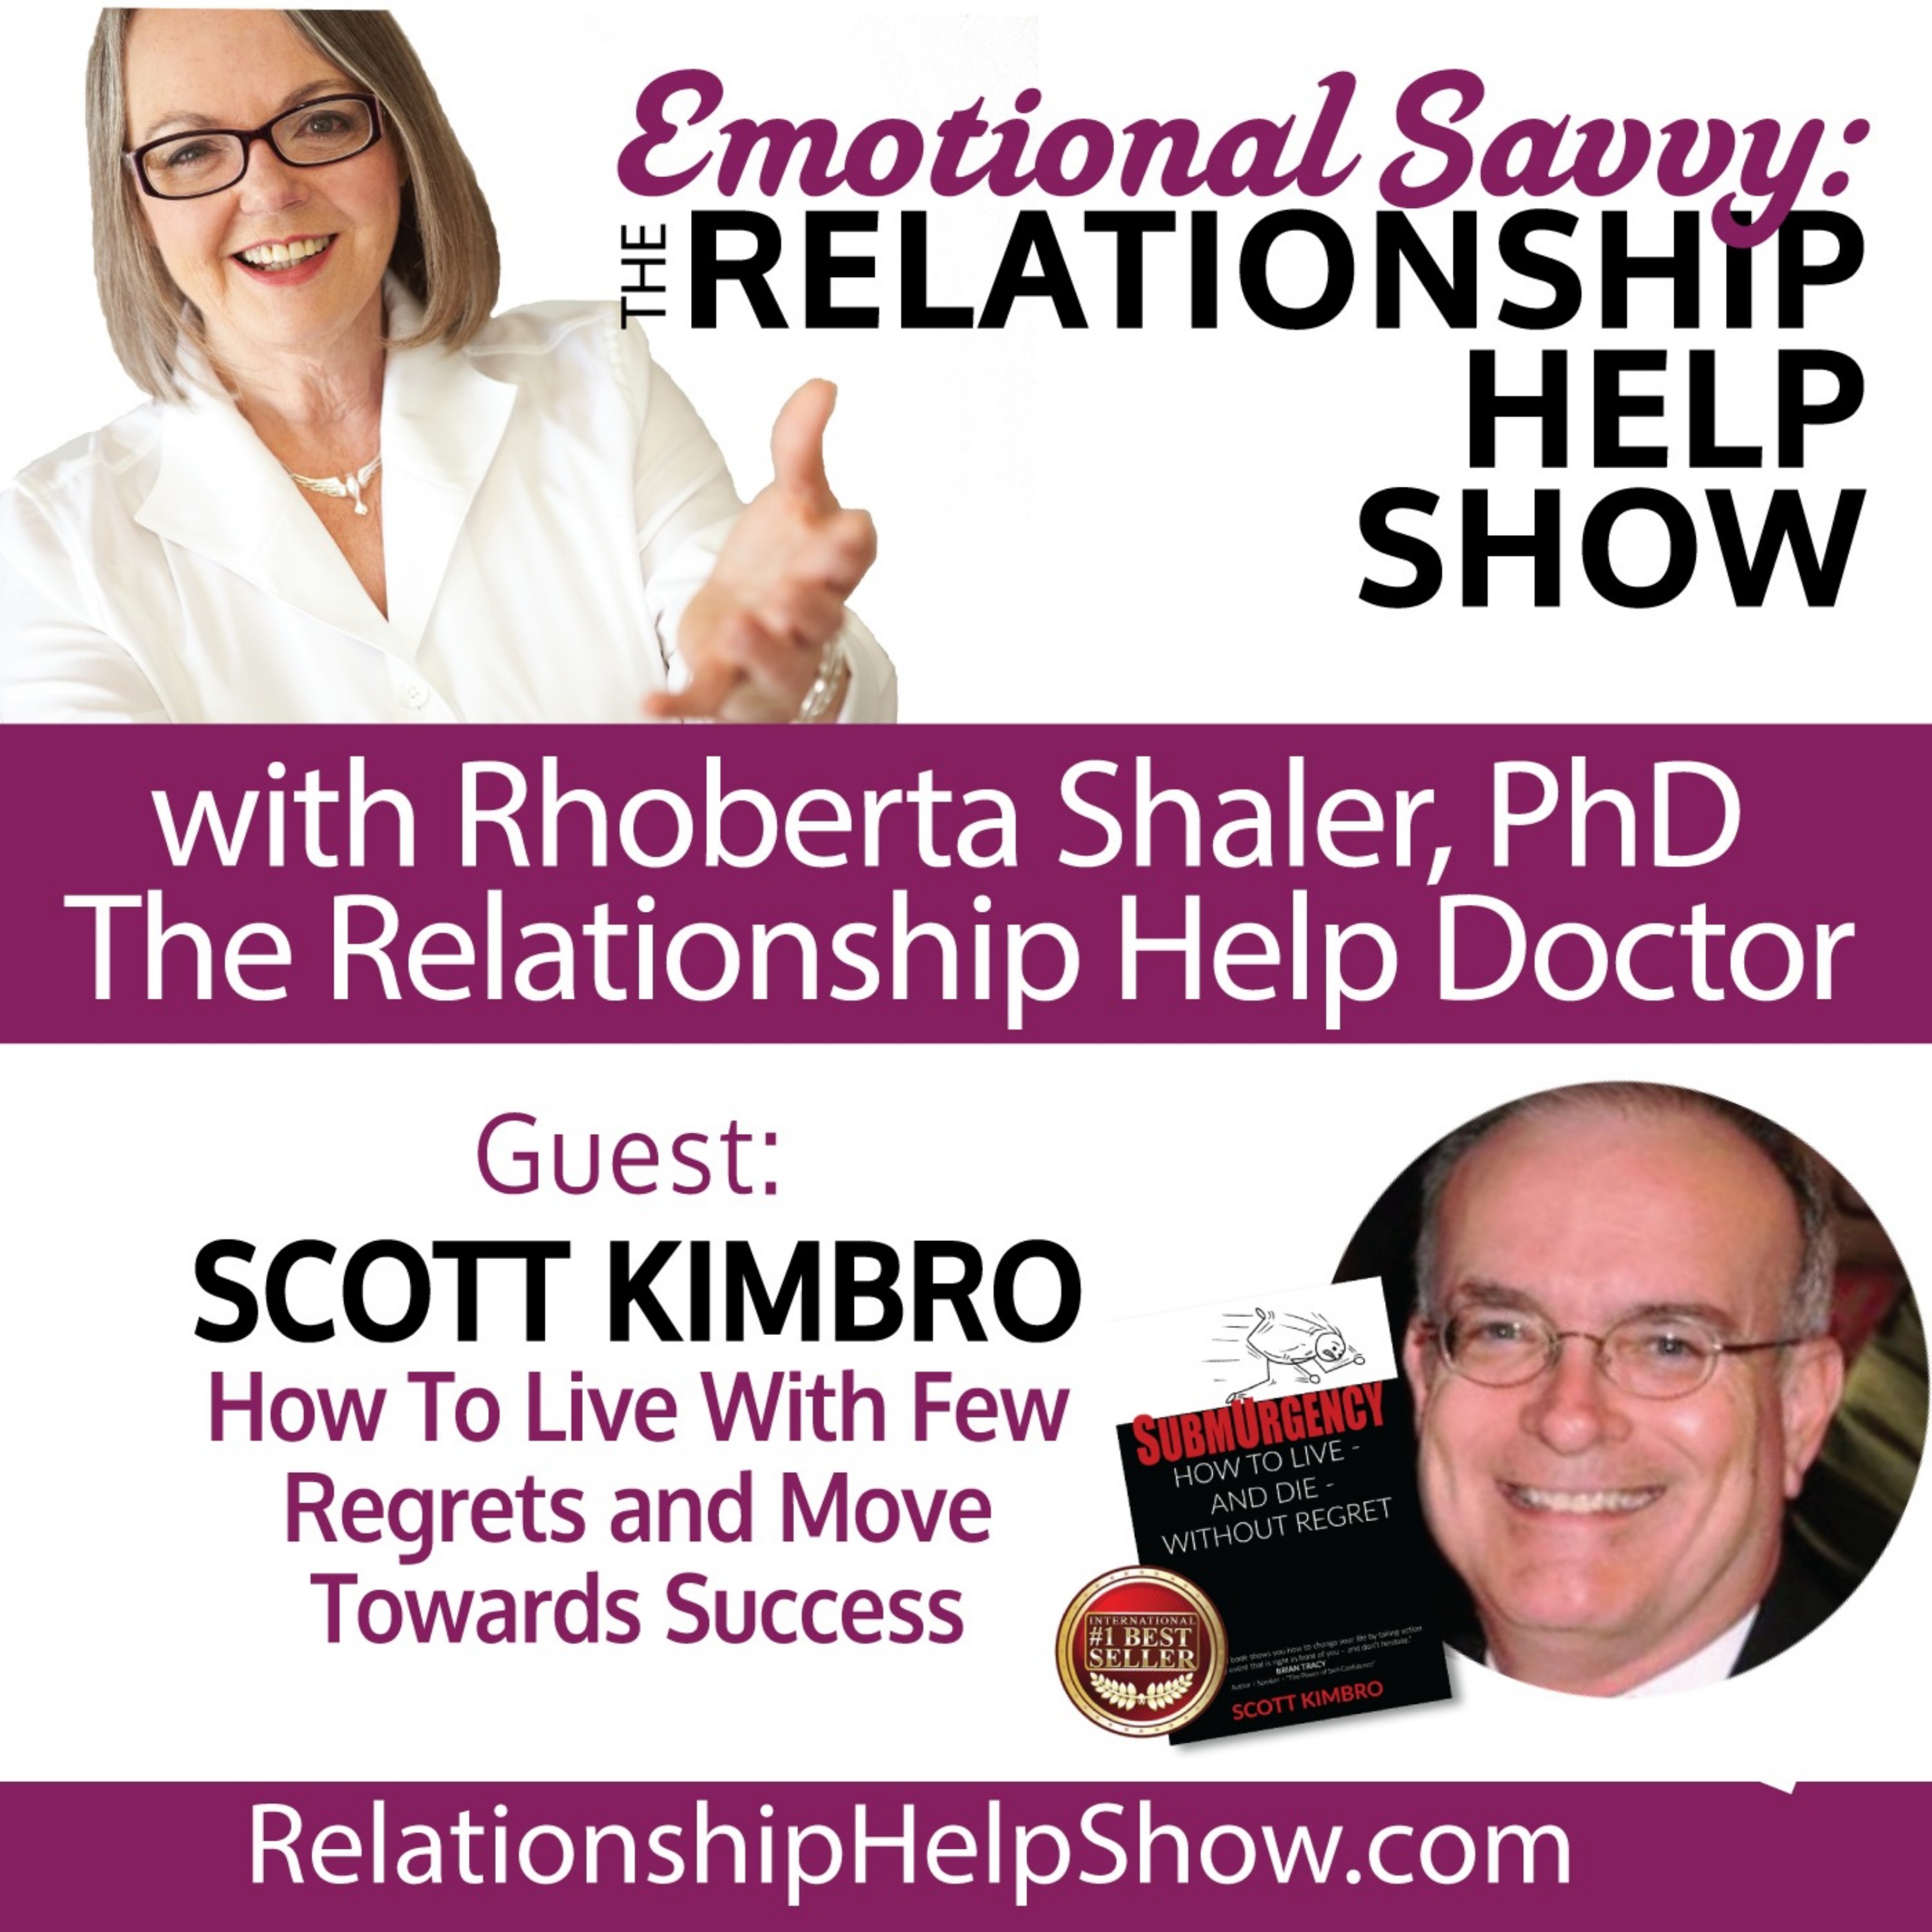 How To Live With Few Regrets & Move Towards Success  GUEST: Scott Kimbro